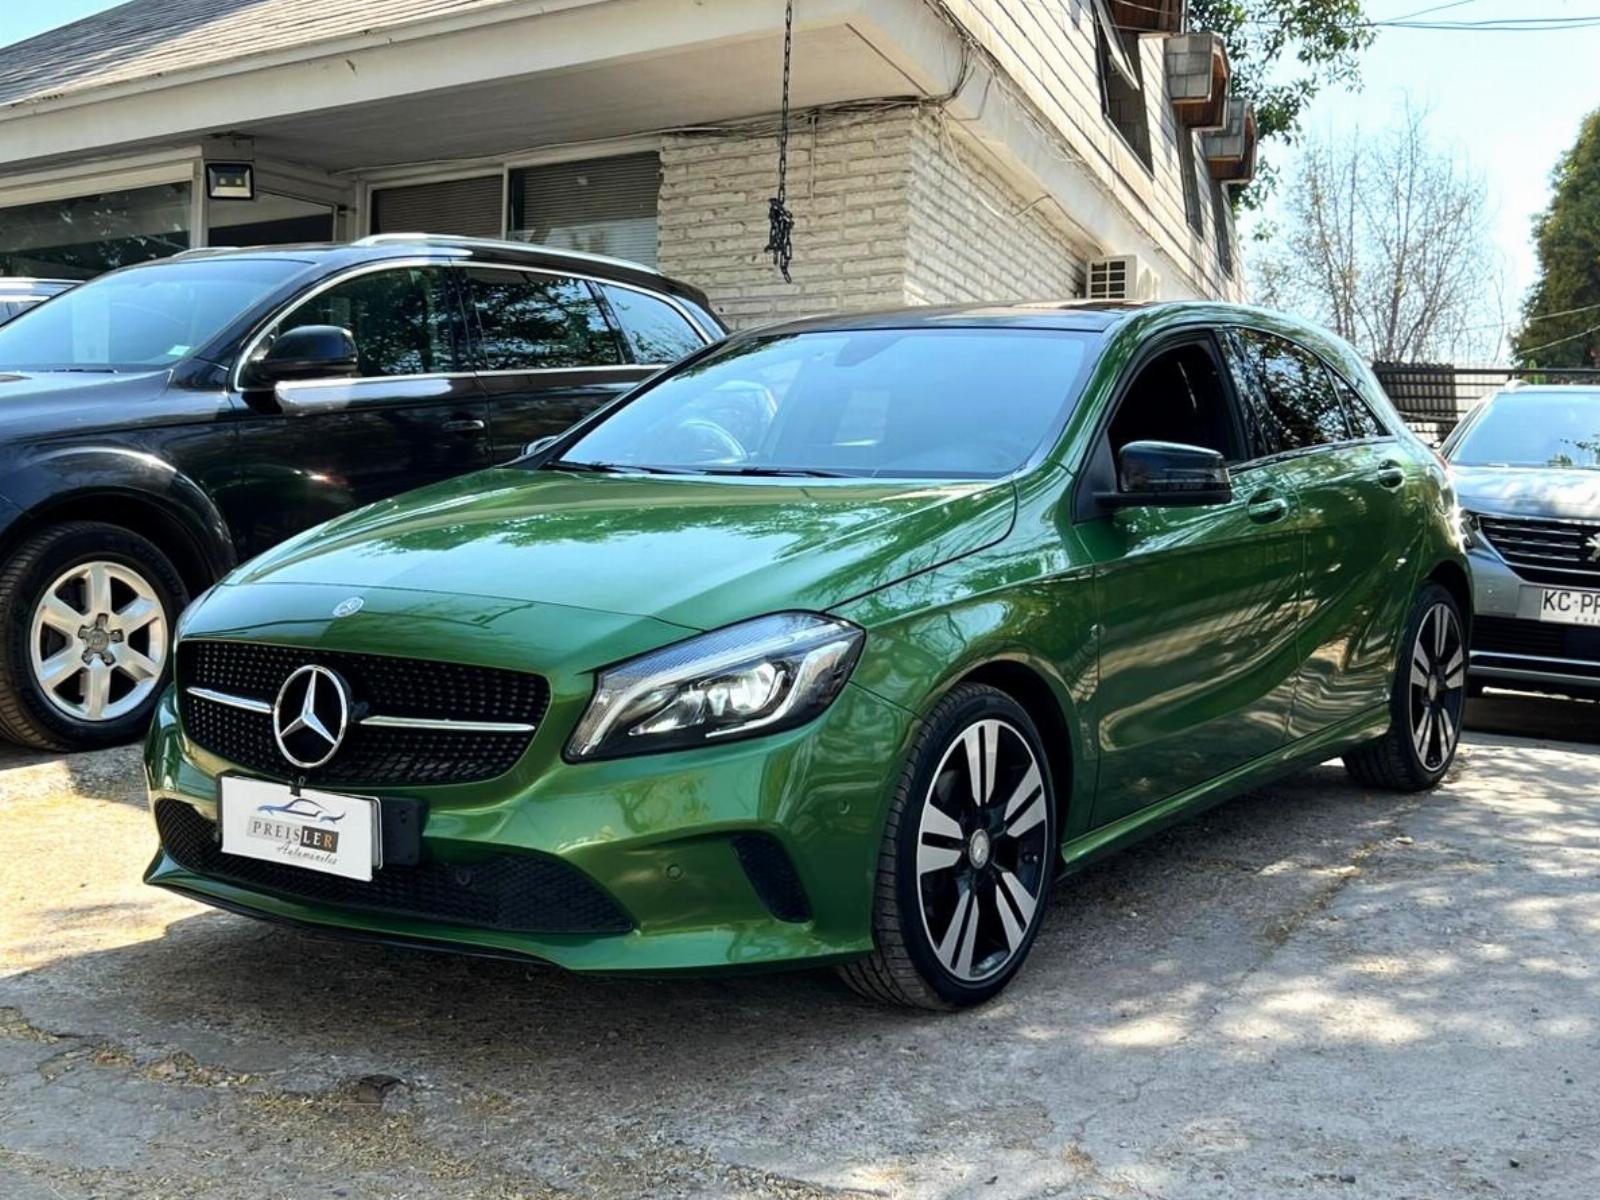 MERCEDES-BENZ A200 DIESEL 2017 EQUIPO EXTRA - 